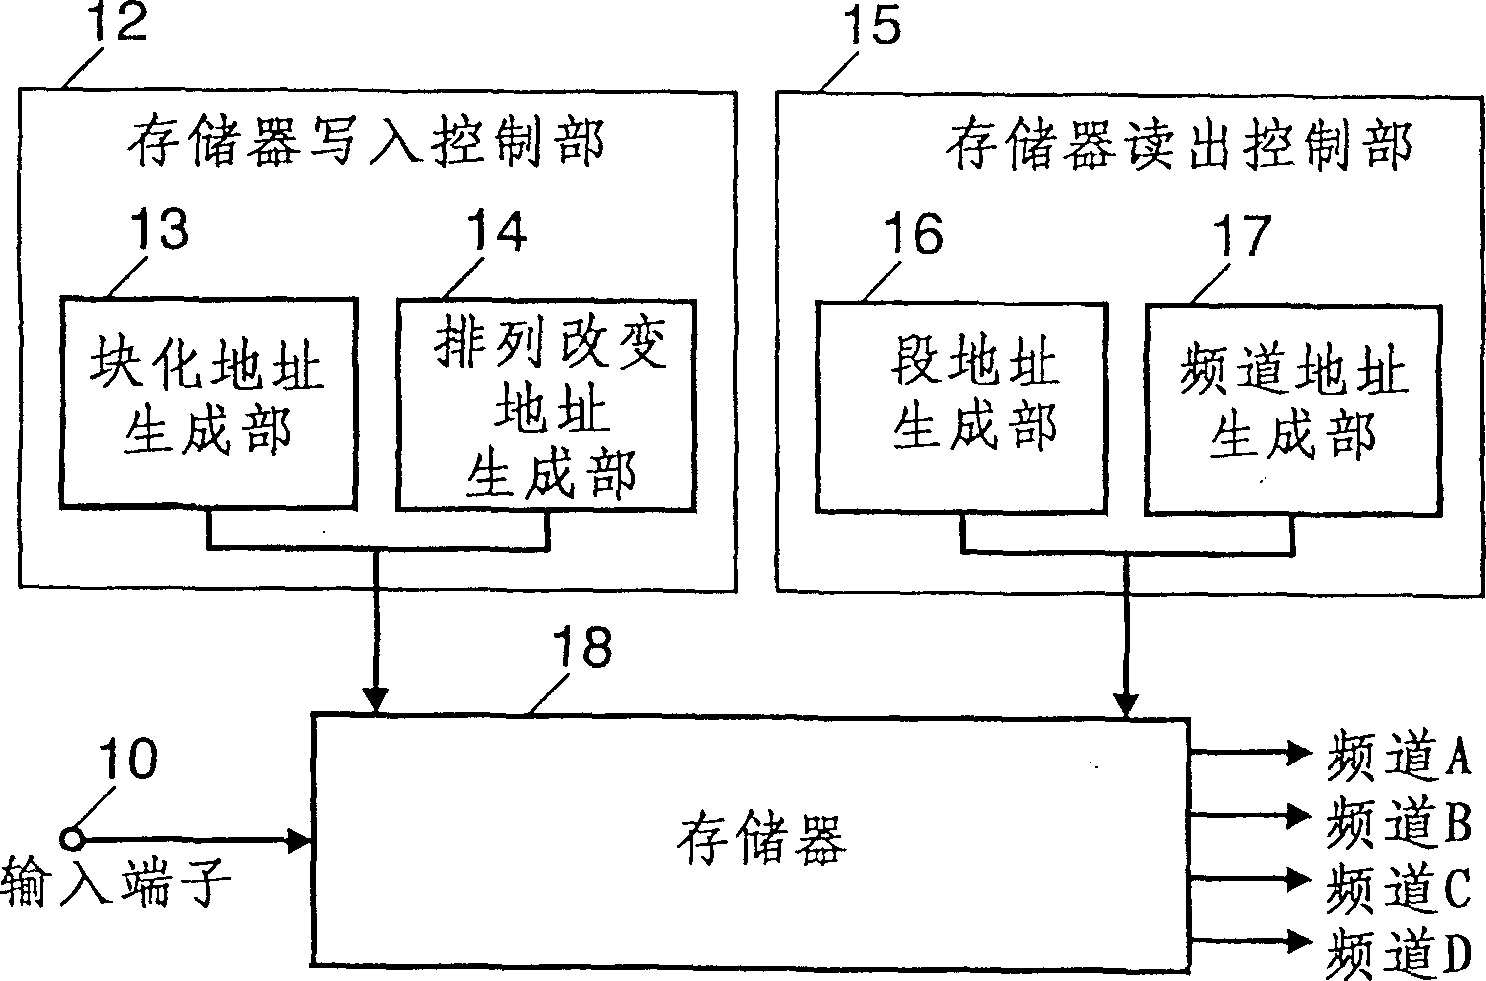 Pictrue signal shffling device and method